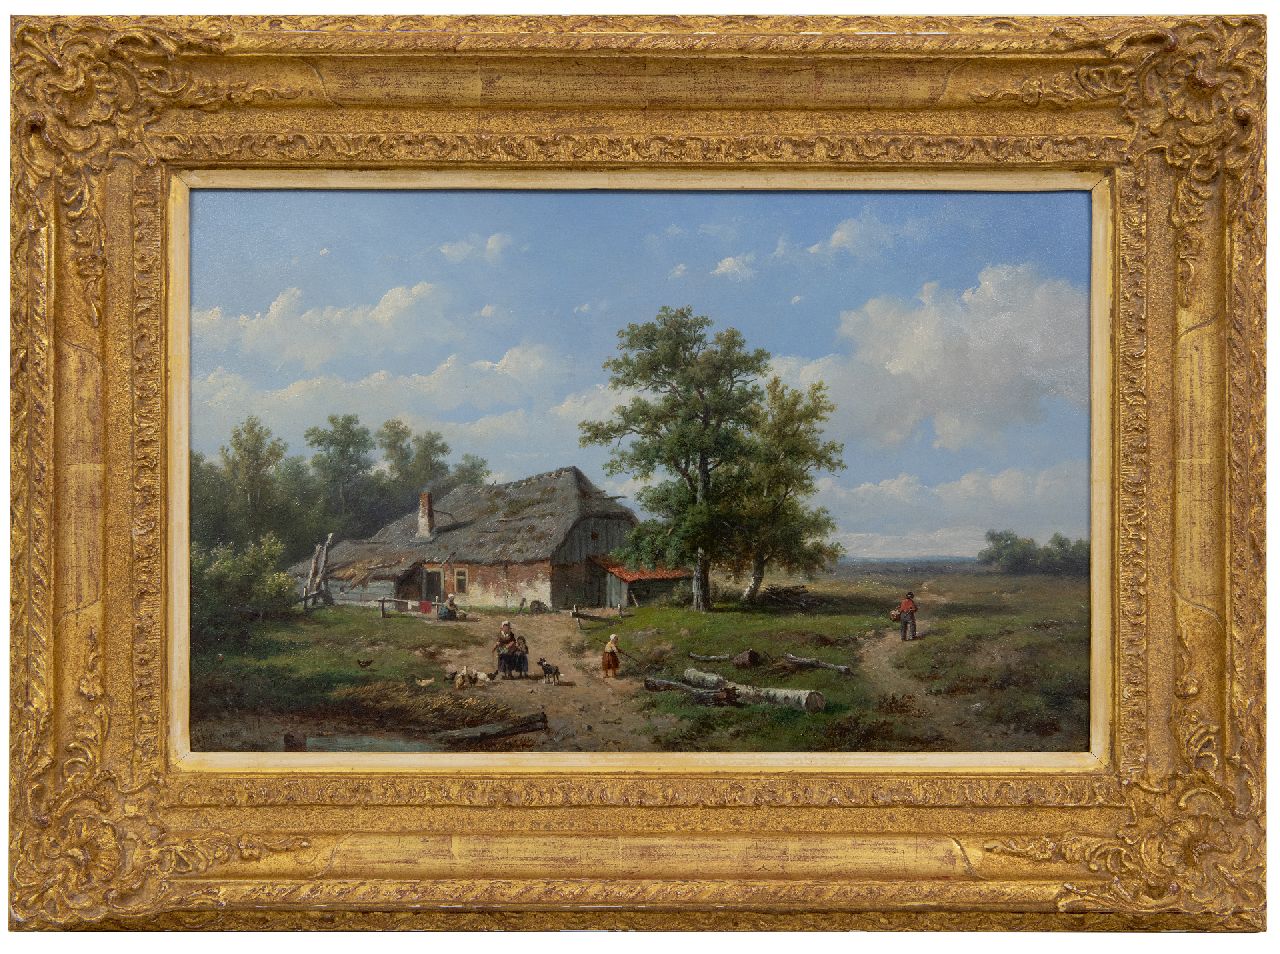 Wijngaerdt A.J. van | Anthonie Jacobus van Wijngaerdt | Paintings offered for sale | A farm on the countryside, oil on panel 27.5 x 43.5 cm, signed l.l.